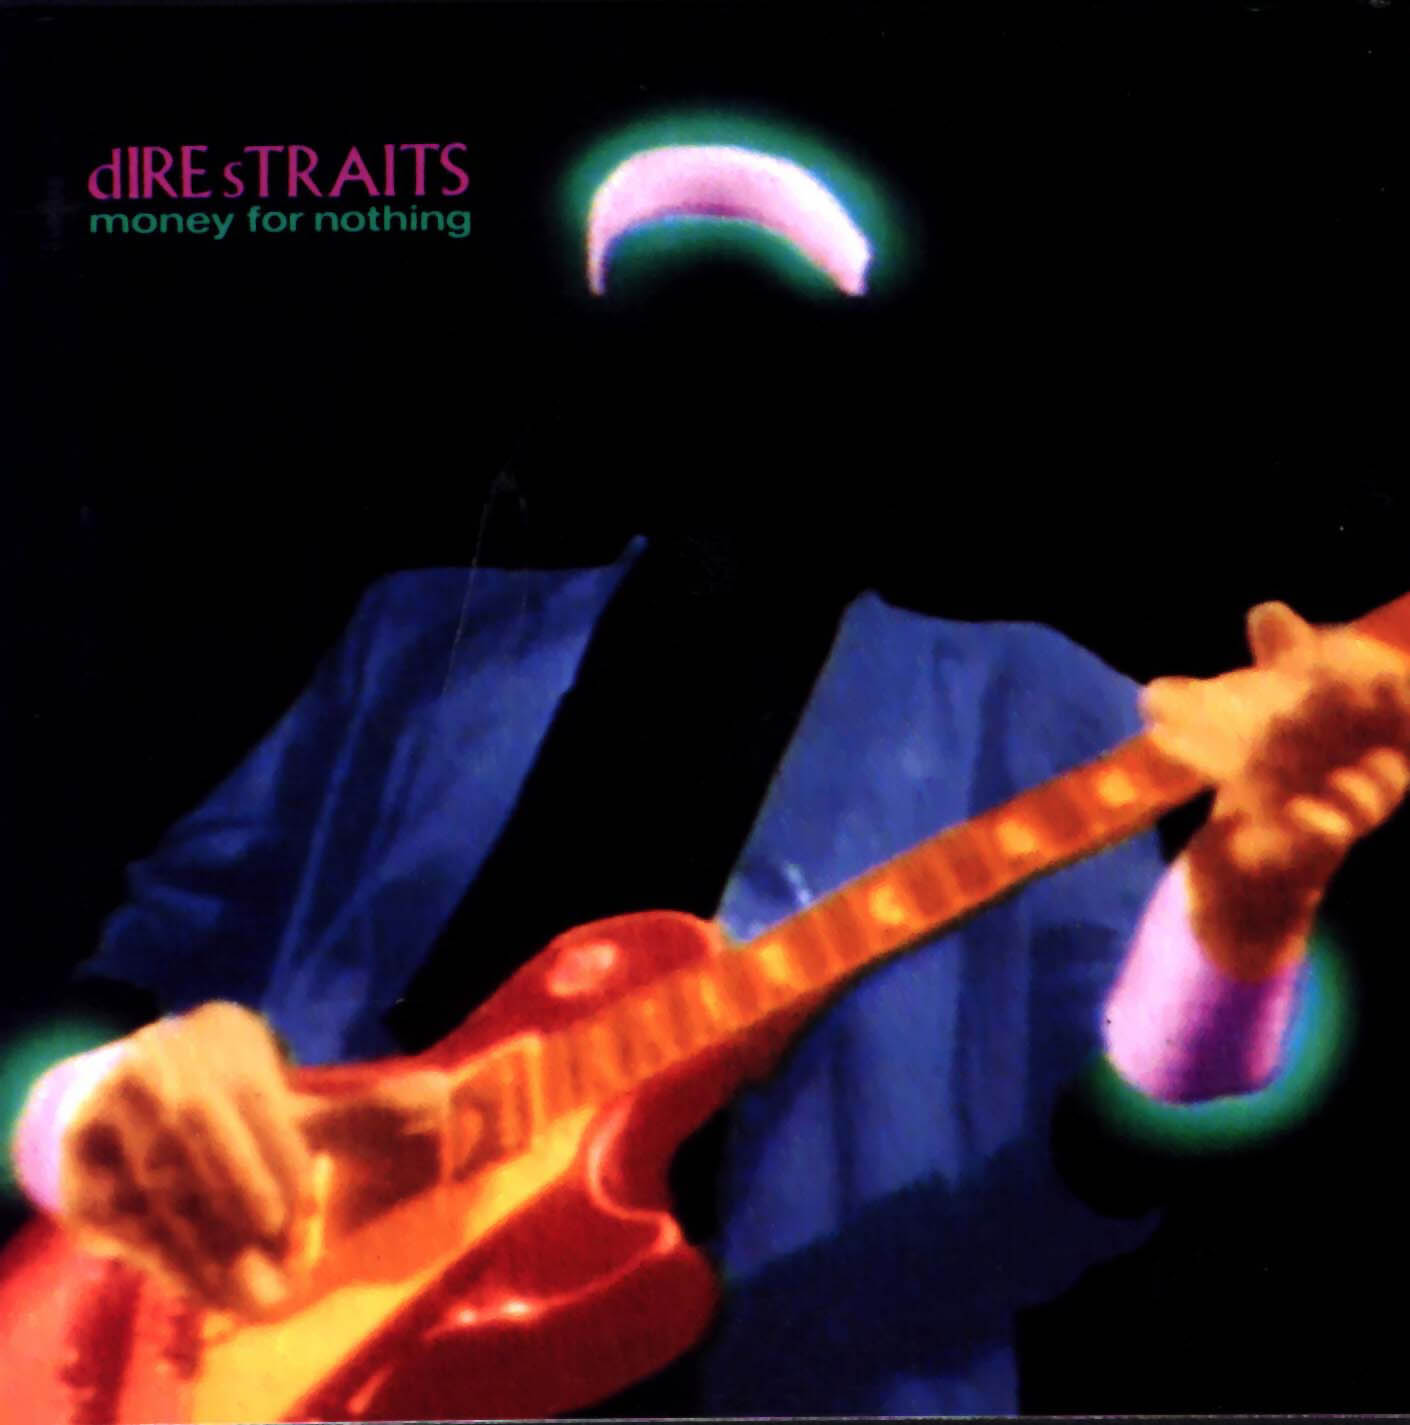 Dire-Straits-Money-for-nothing.jpg